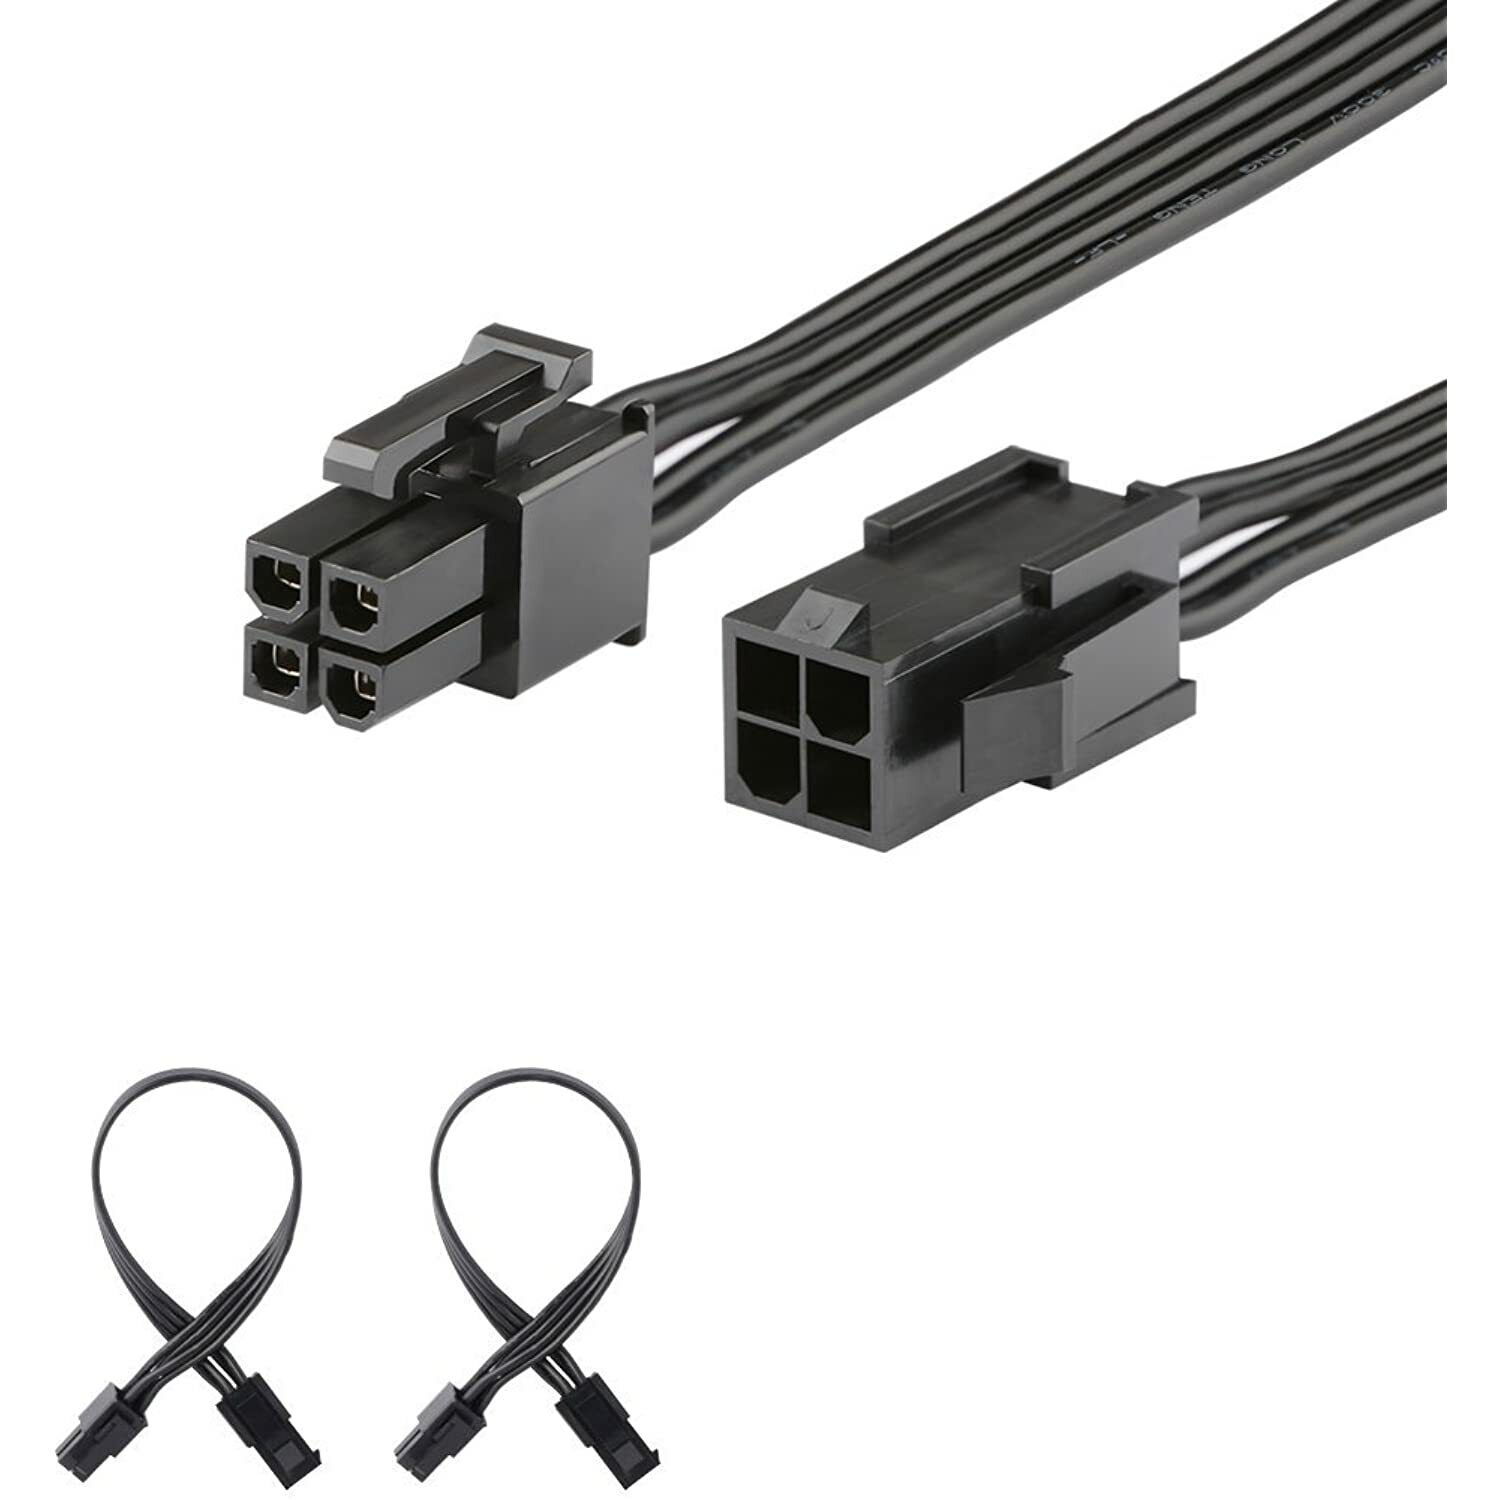 J&D (2 Pack) ATX 4 Pin CPU Male to Female Extension Cable –, 8 inch